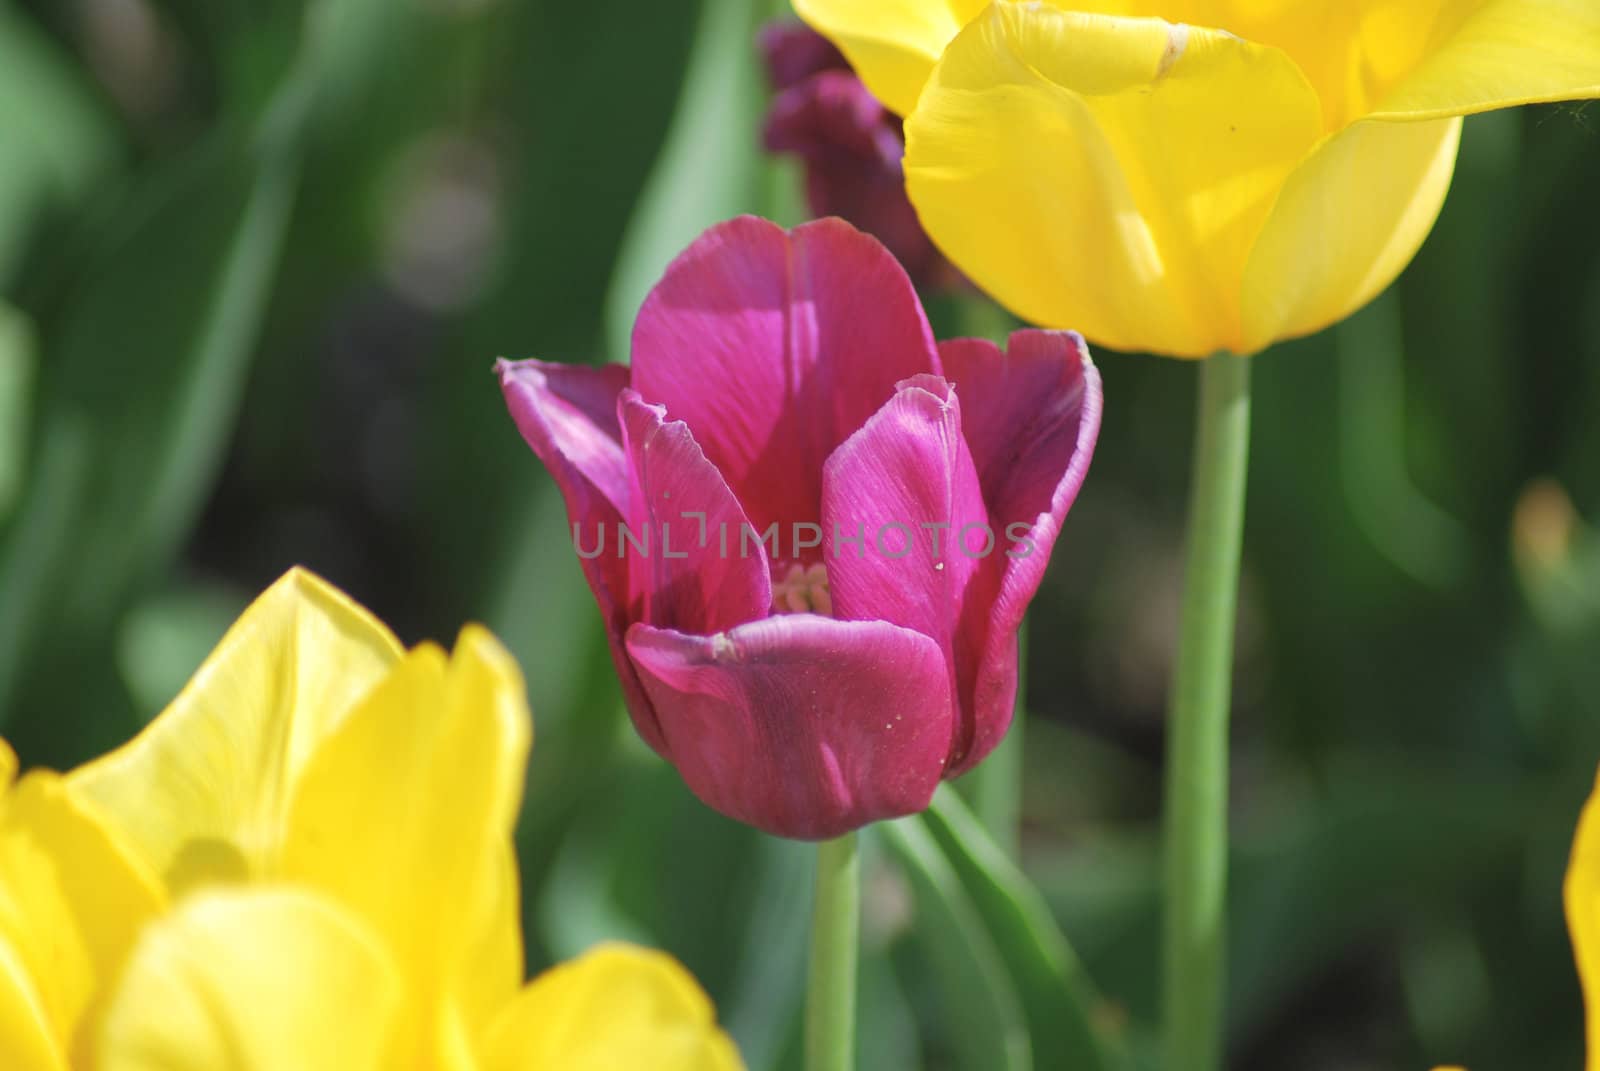 One violet tulip and two yellow tulips ,flowers background by svtrotof